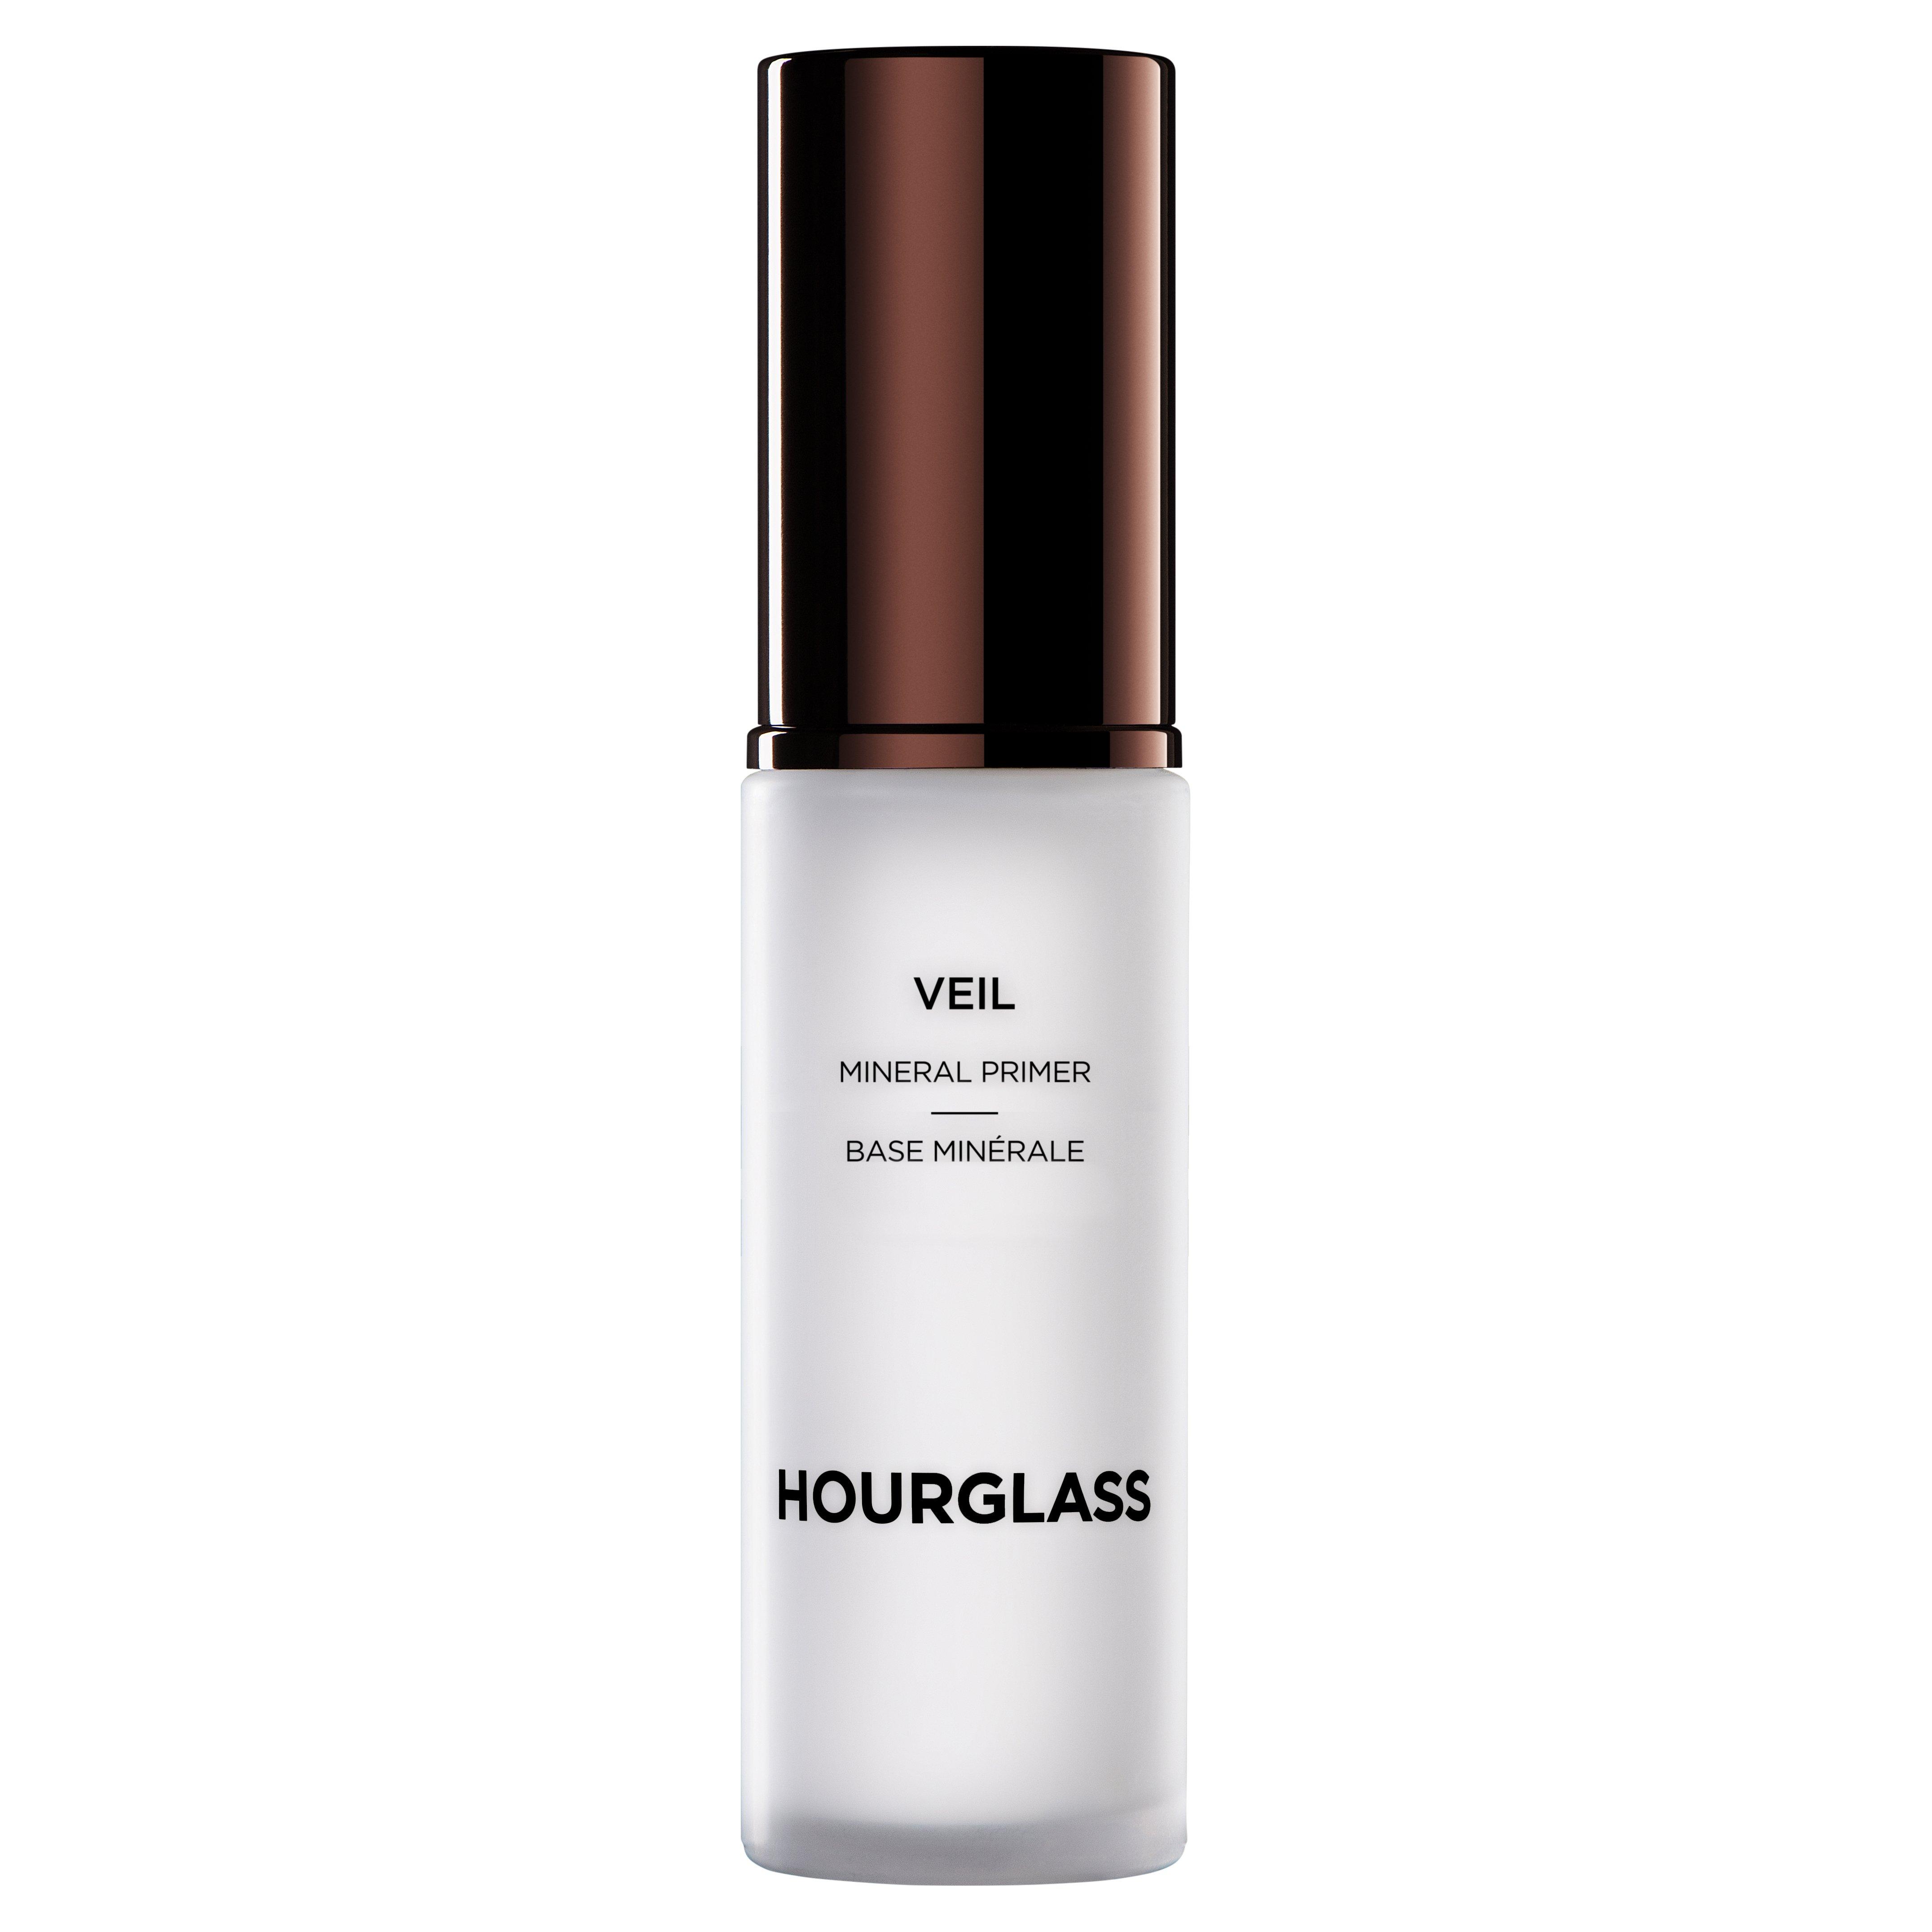 Image of HOURGLASS Veil Mineral Primer